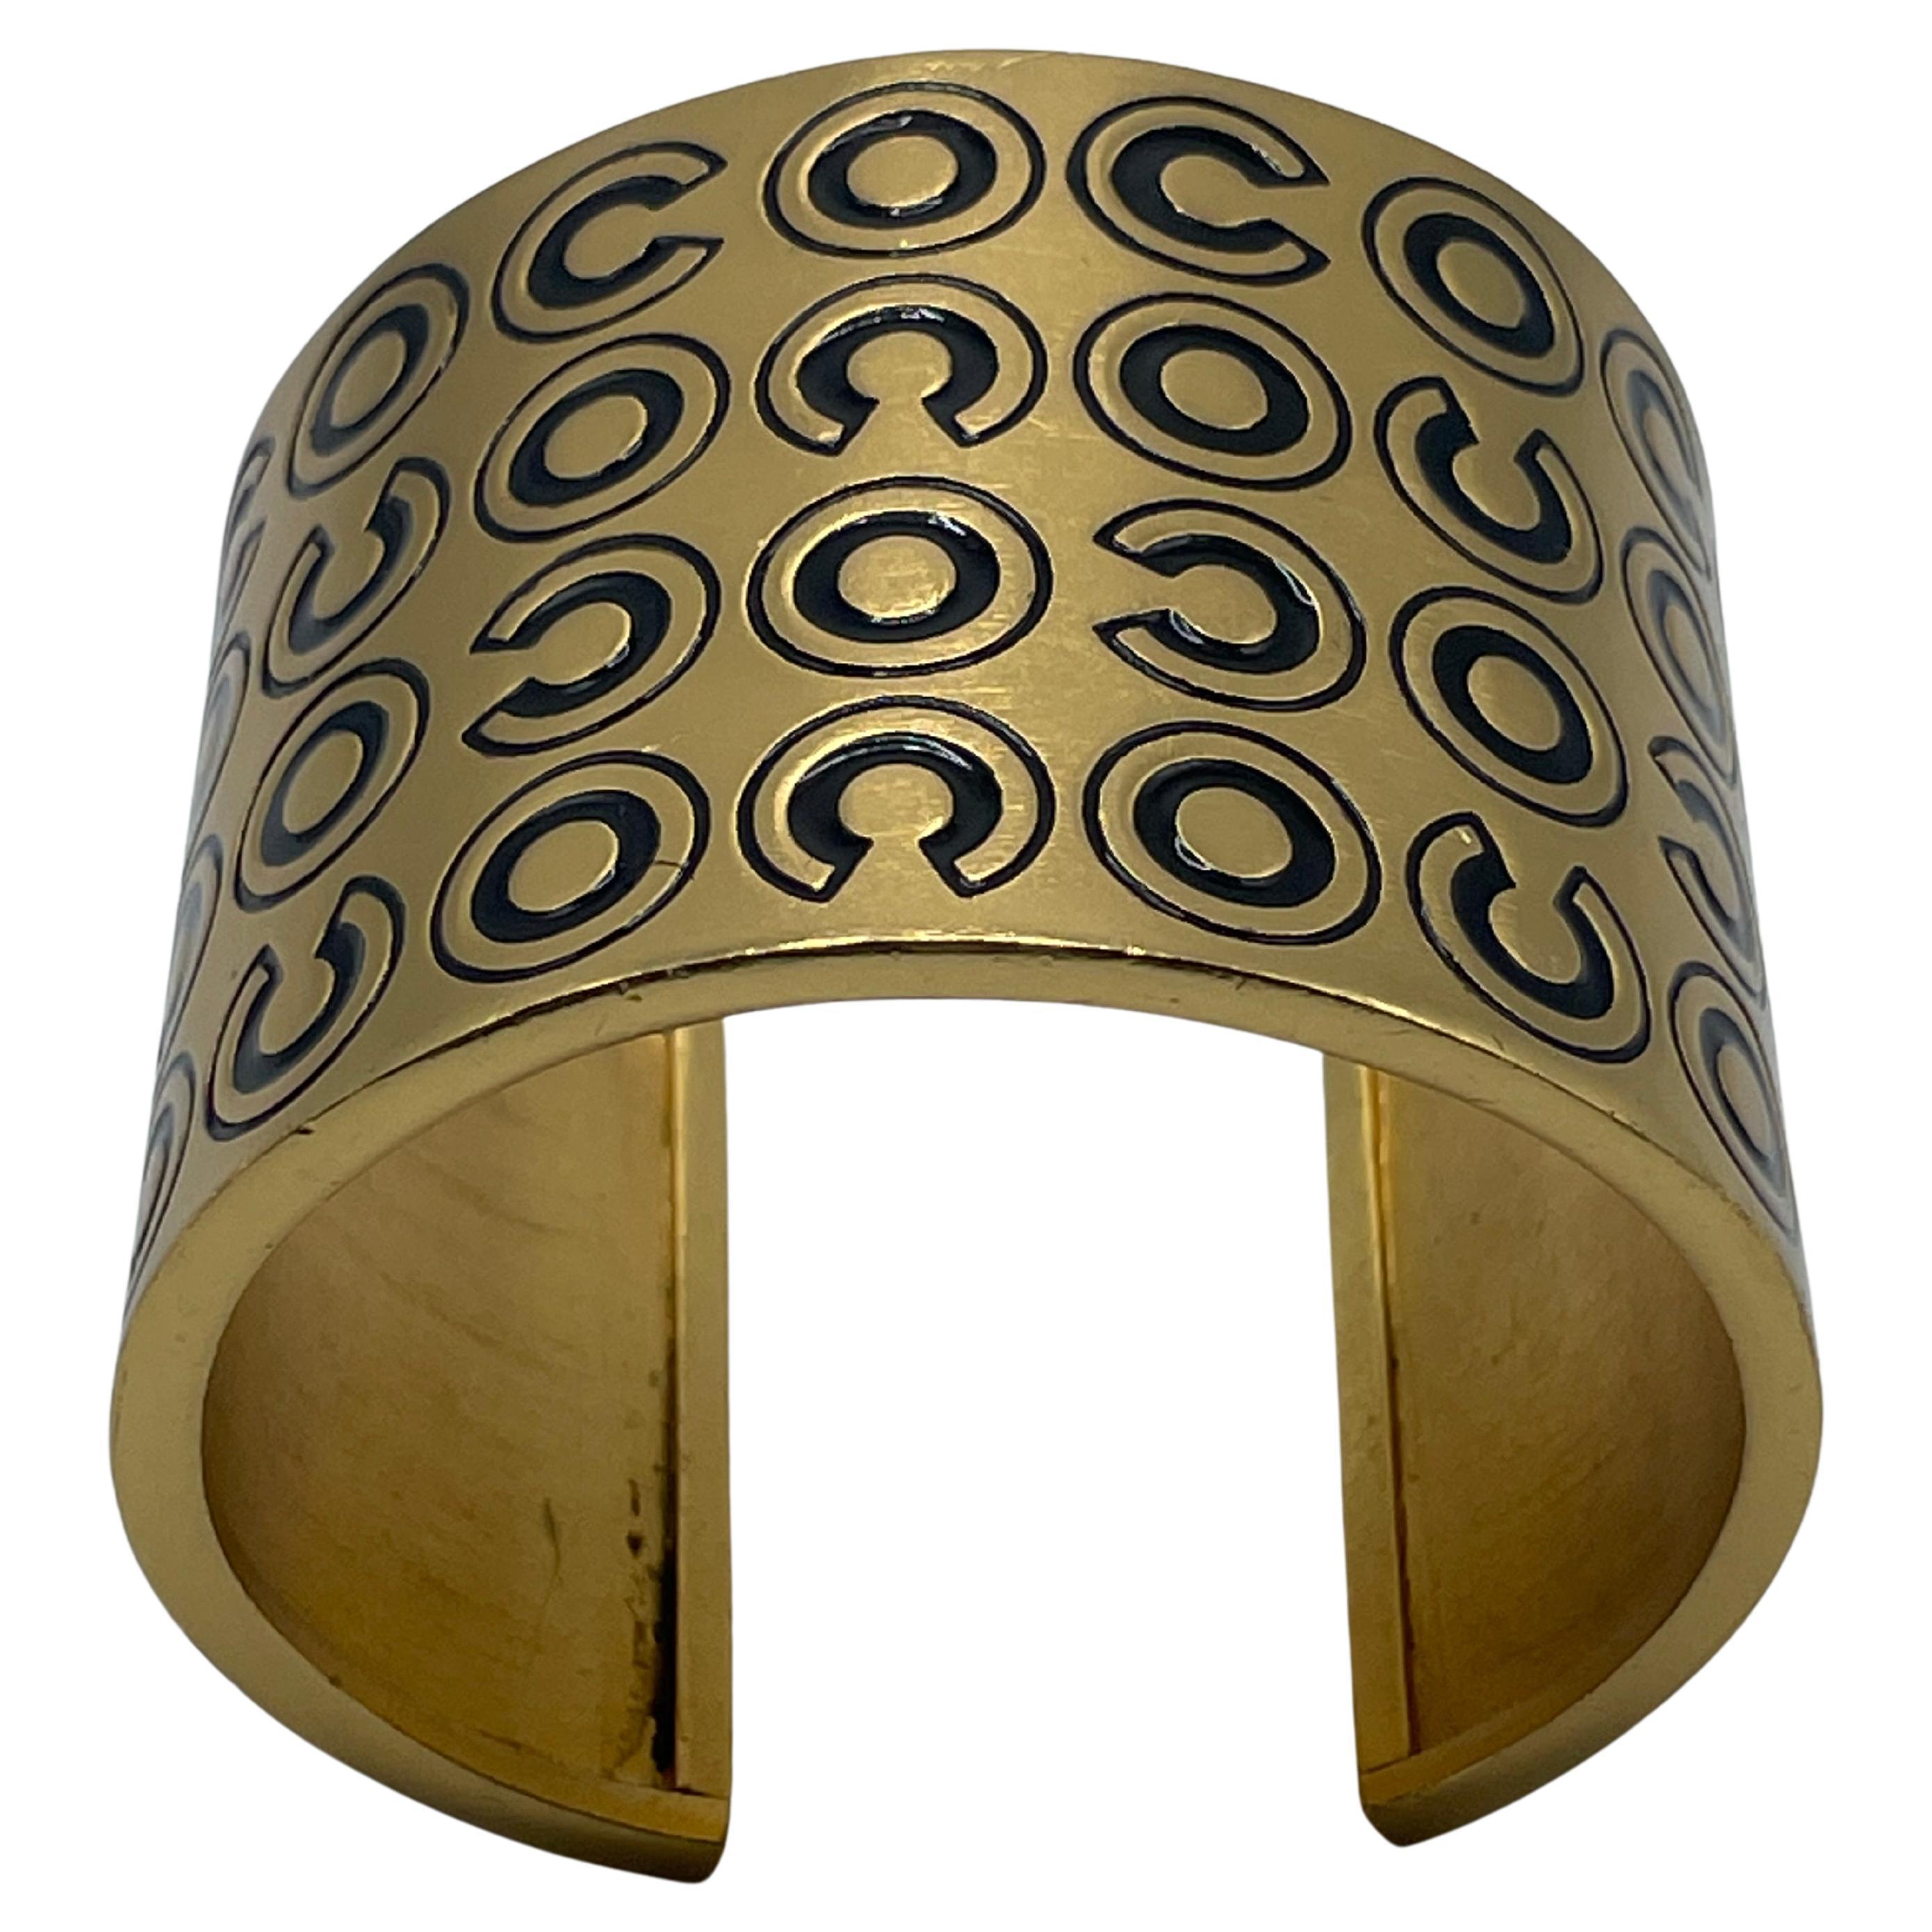 Gold-plated COCO bracelet cuff. This cuff is adorned with gold-tone metal and black enamelled lettering reading 